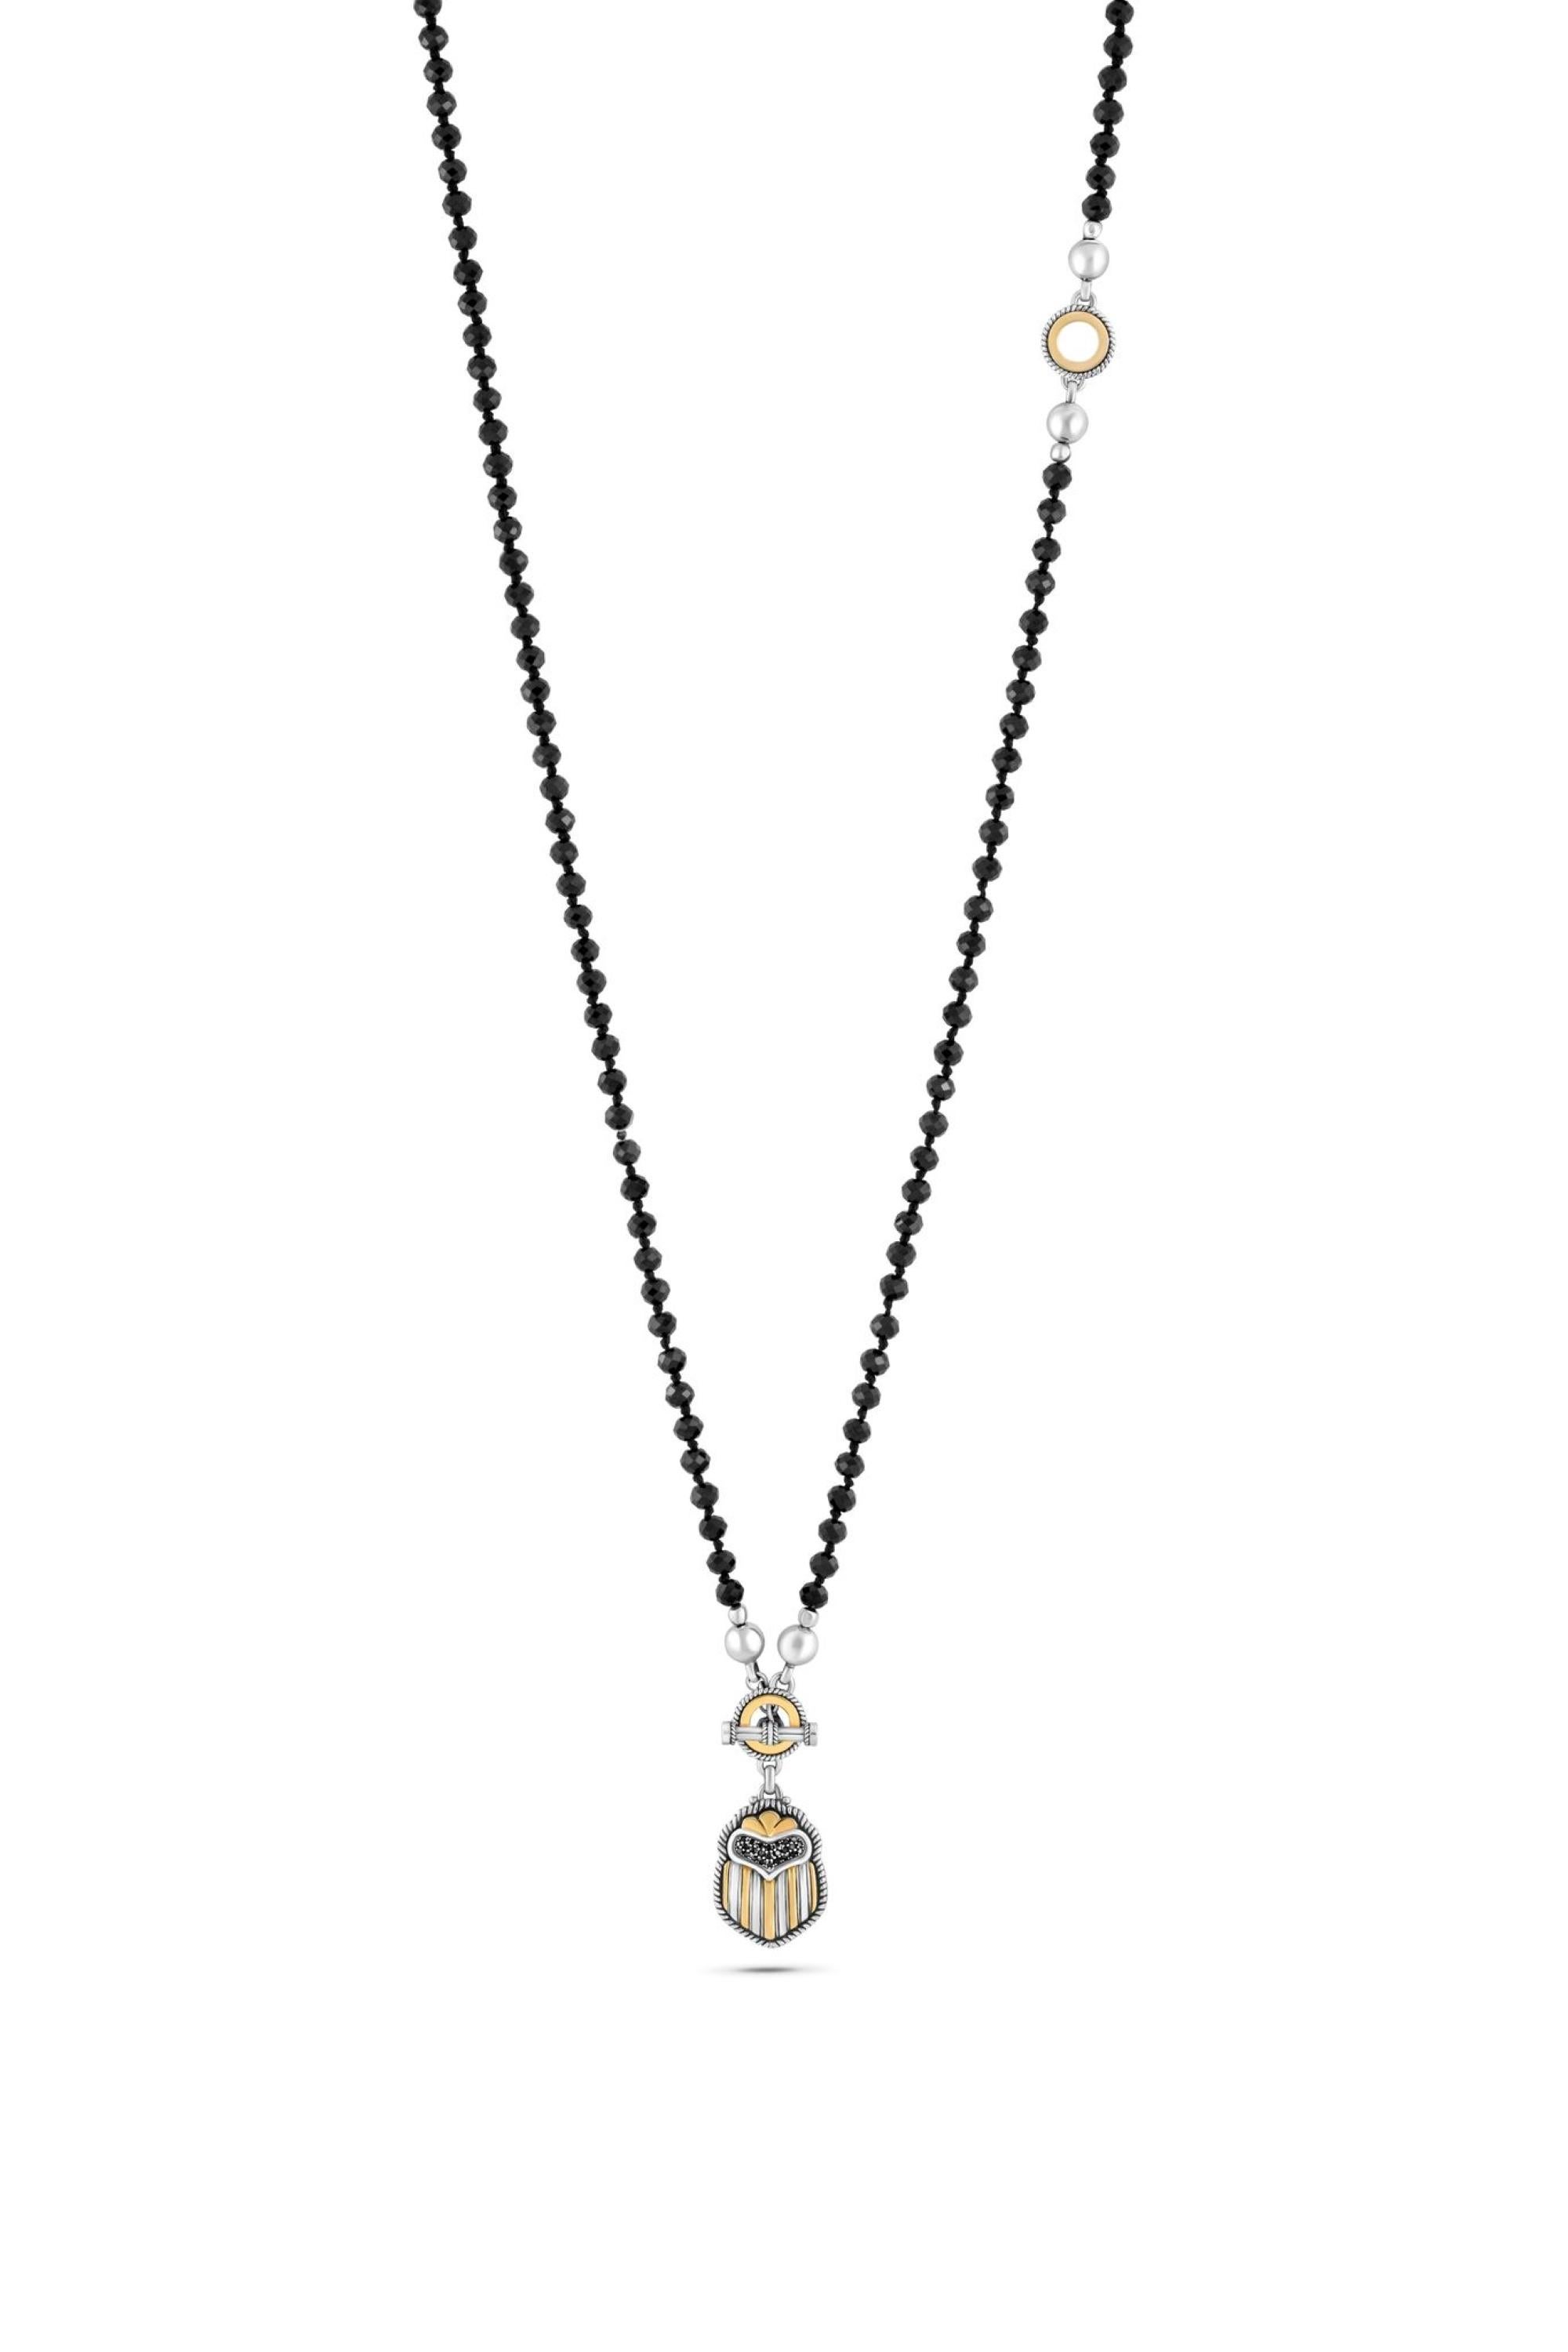 18 Karat Gold and Sterling Silver Multi-Wear Beaded Scarab Necklace adorned with diamonds, semi-precious and precious stones. The Necklace converts from Full length to a Lariat style via the signature T-Lock fastening.

Available Stone